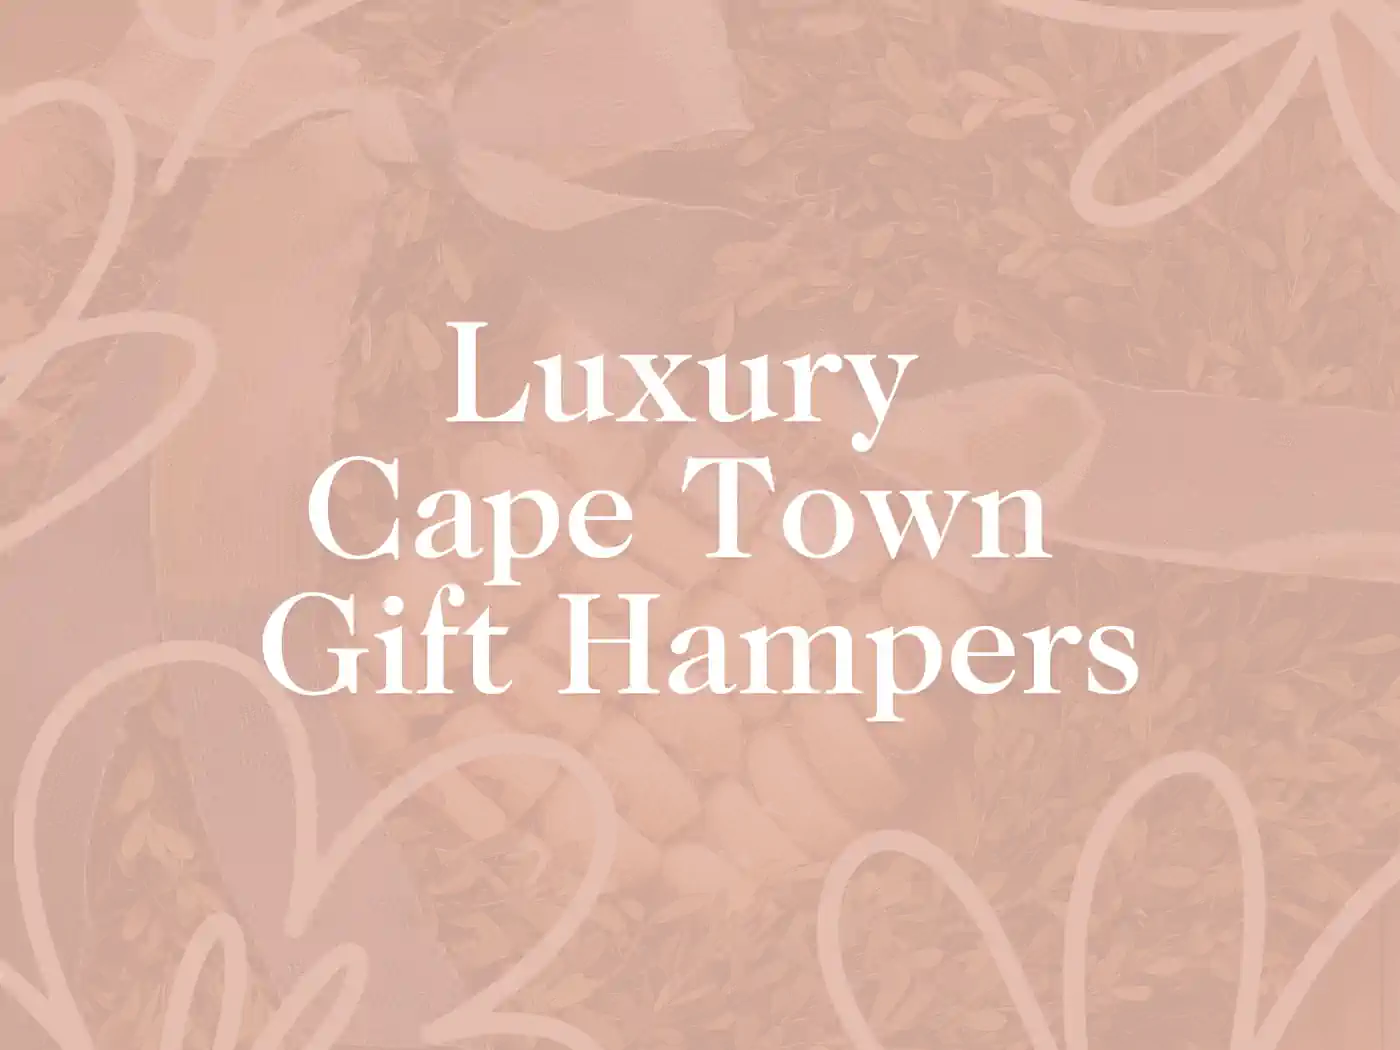 Luxury Cape Town Gift Hampers." Fabulous Flowers and Gifts - Luxury Cape Town Gift Hampers